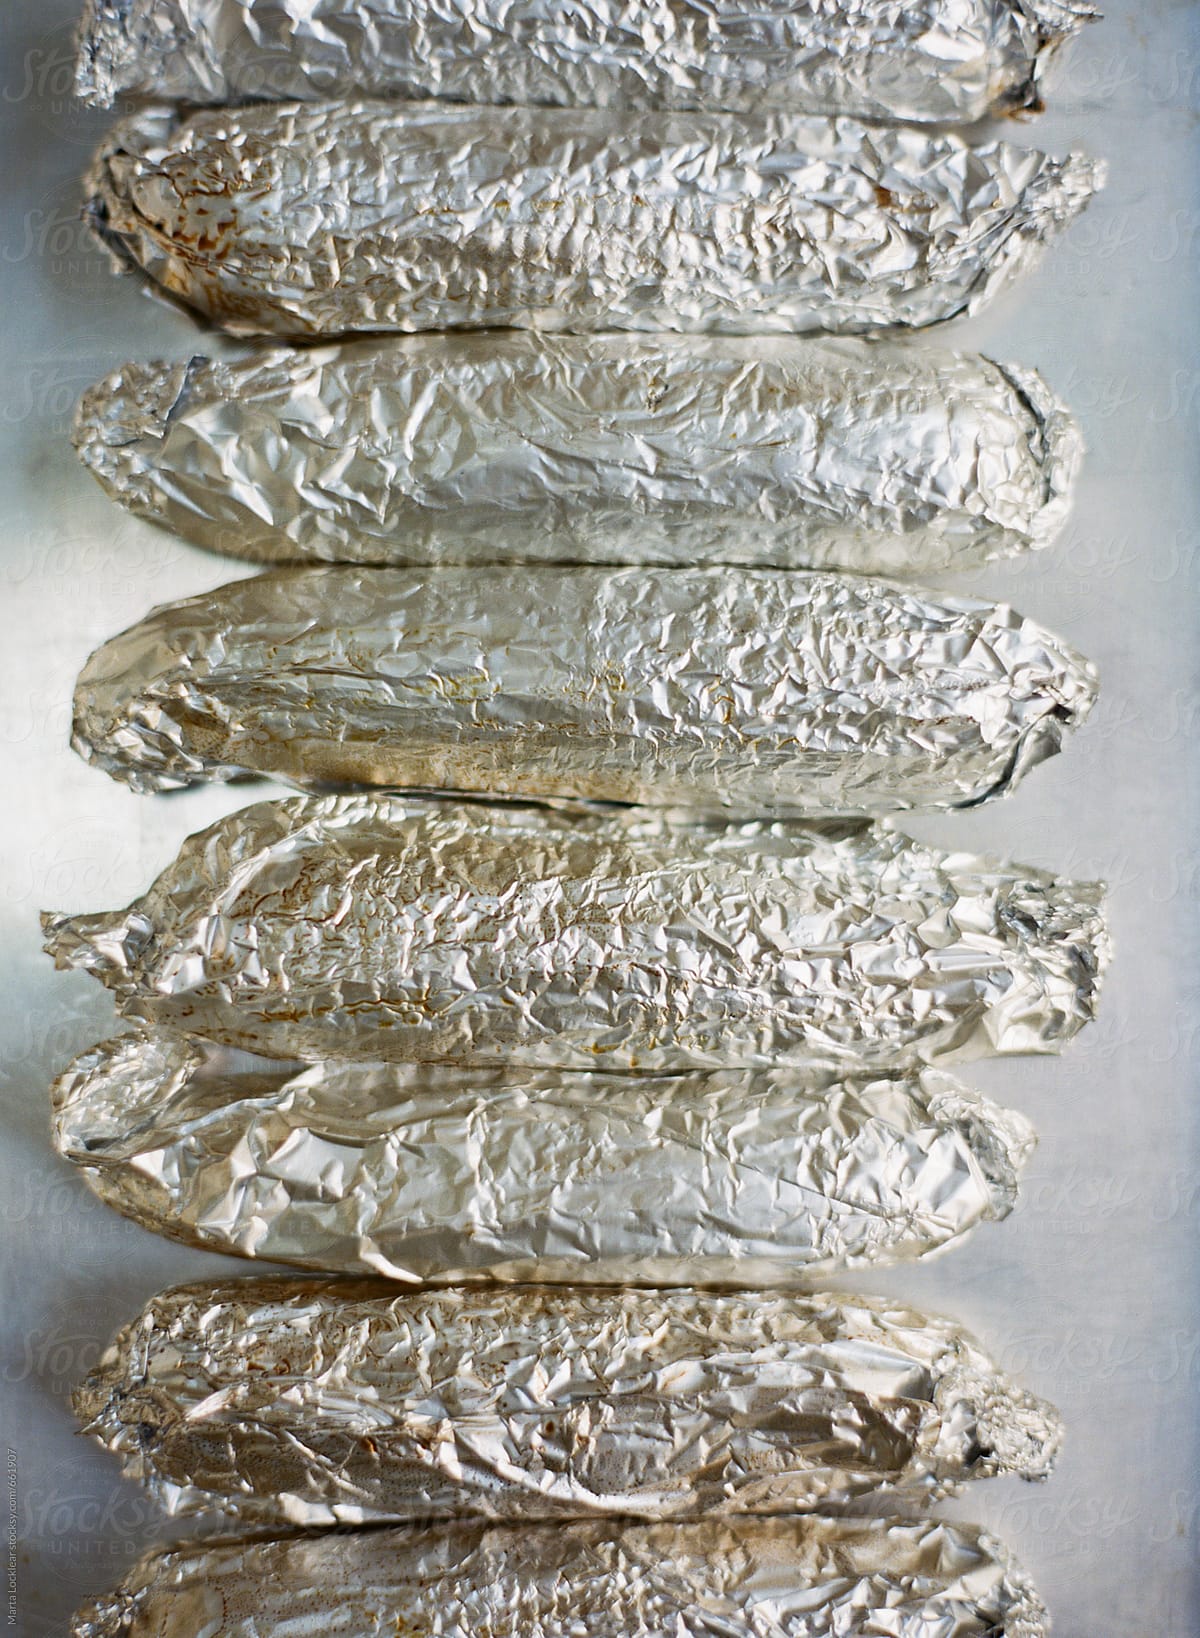 Corn on the cob cooked in aluminum foil